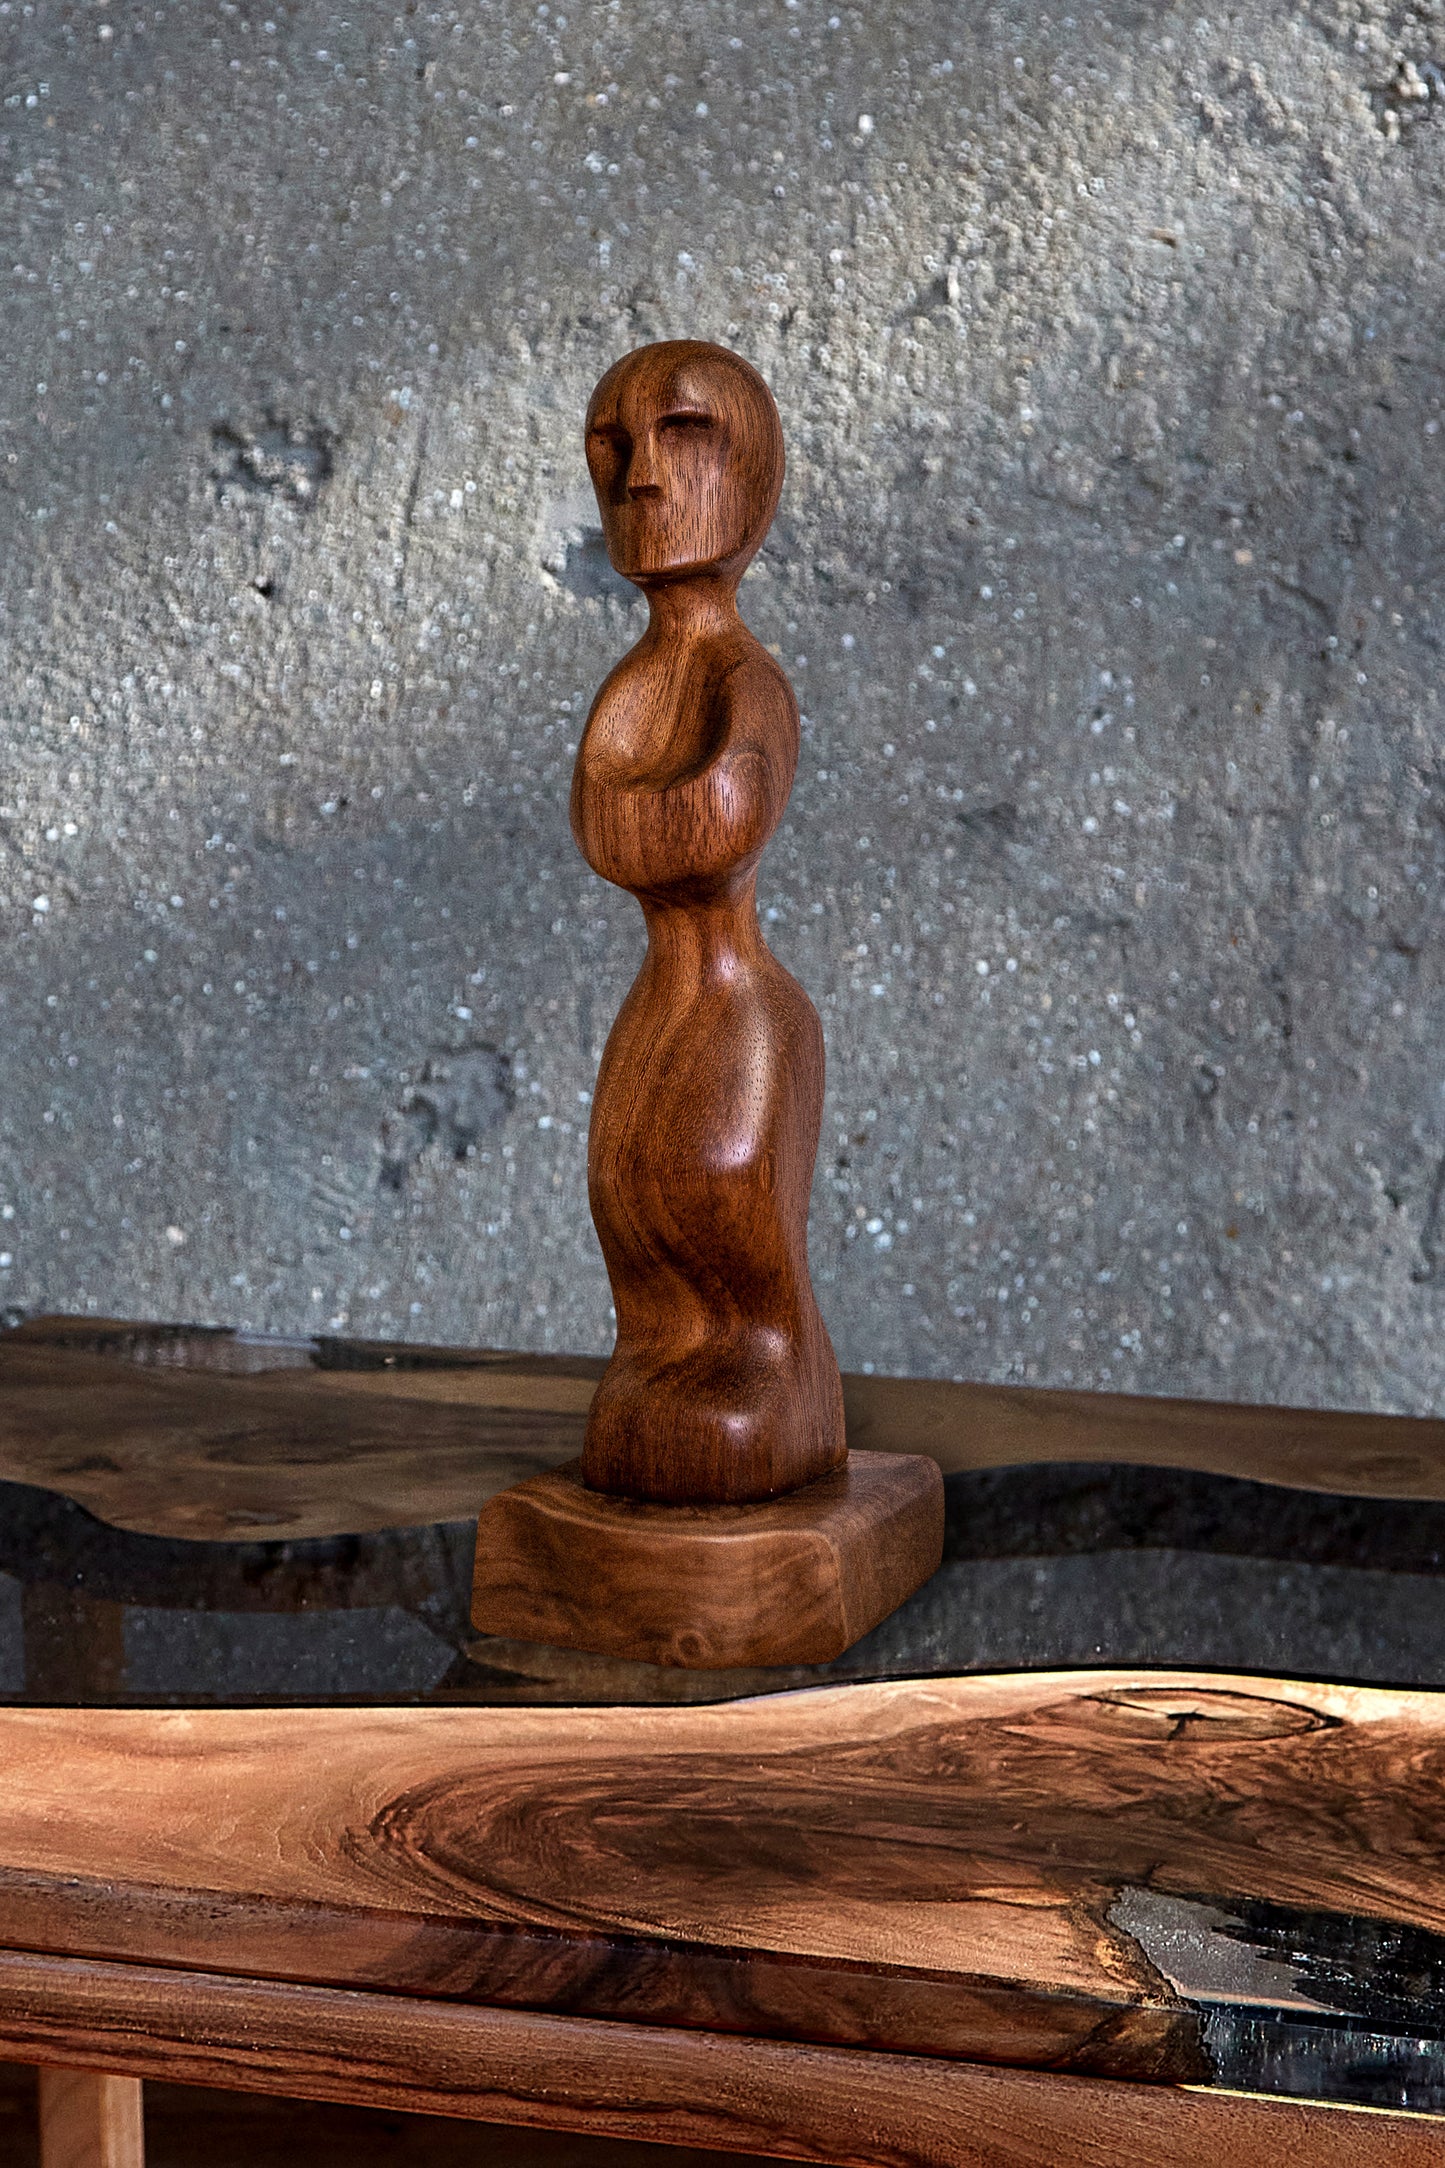 Experience the Elegance of 'Iroko Prayer' with Our Live Edge Sculpture. This captivating wooden statue is a true work of art, meticulously handcrafted to grace your home with its presence. Fashioned from the exquisite Iroko wood, renowned for its healing properties, this remarkable sculpture showcases a beautifully hand-carved wooden figurine, elegantly mounted on a sleek black walnut raw edge plinth. It's a truly original wood sculpture that adds a touch of timeless beauty to any space.